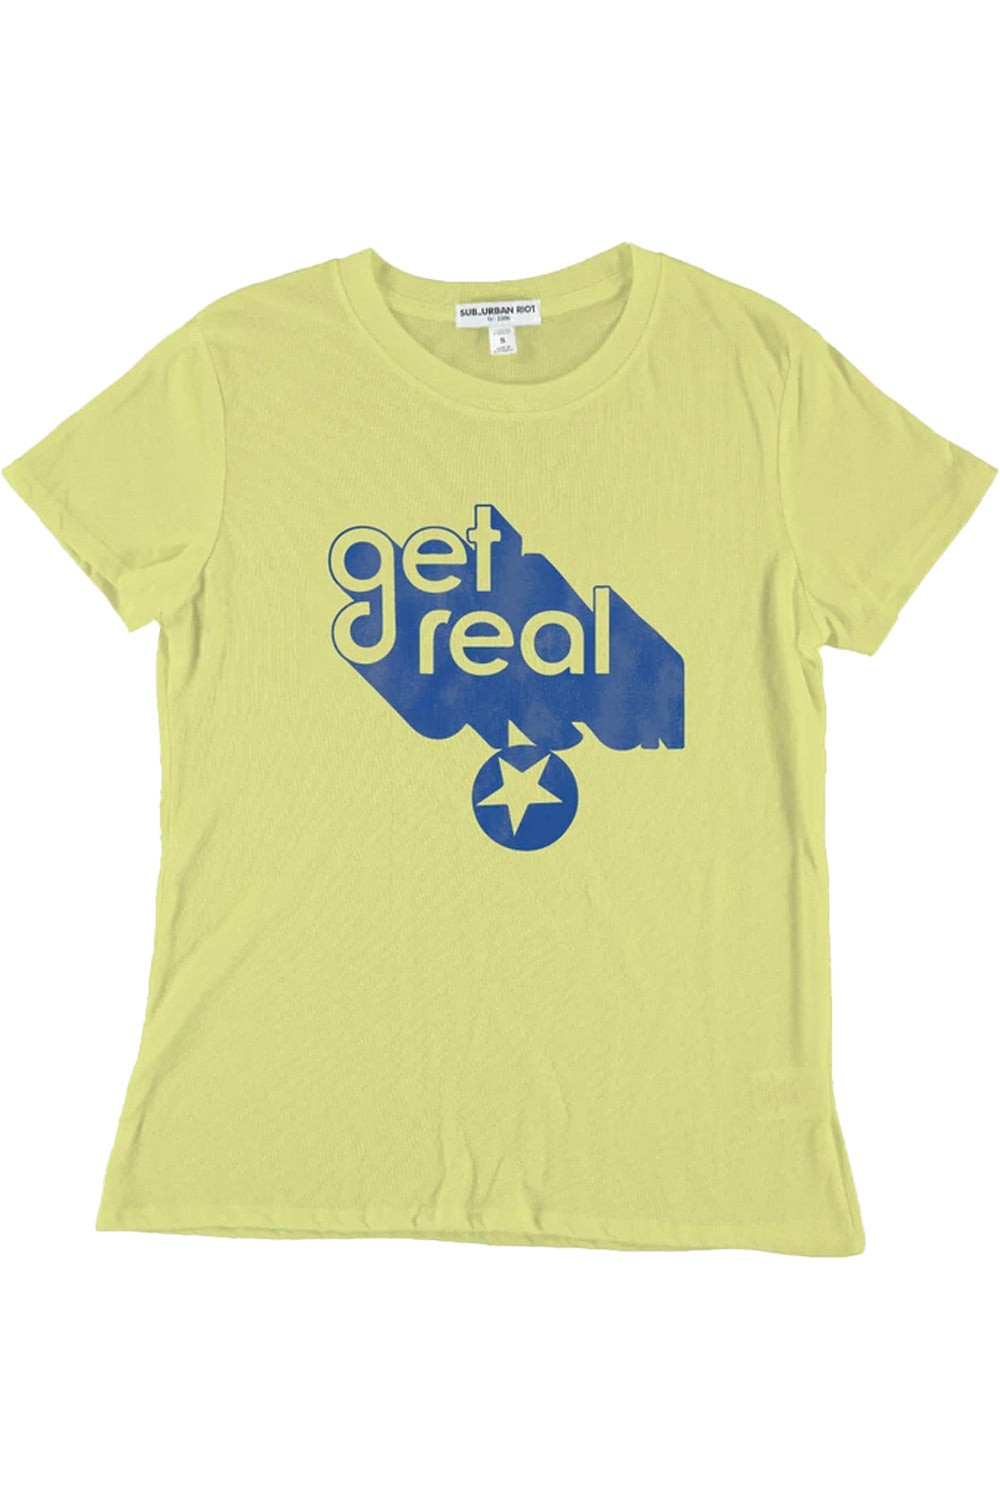 GET REAL YOUTH SIZE LOOSE TEE